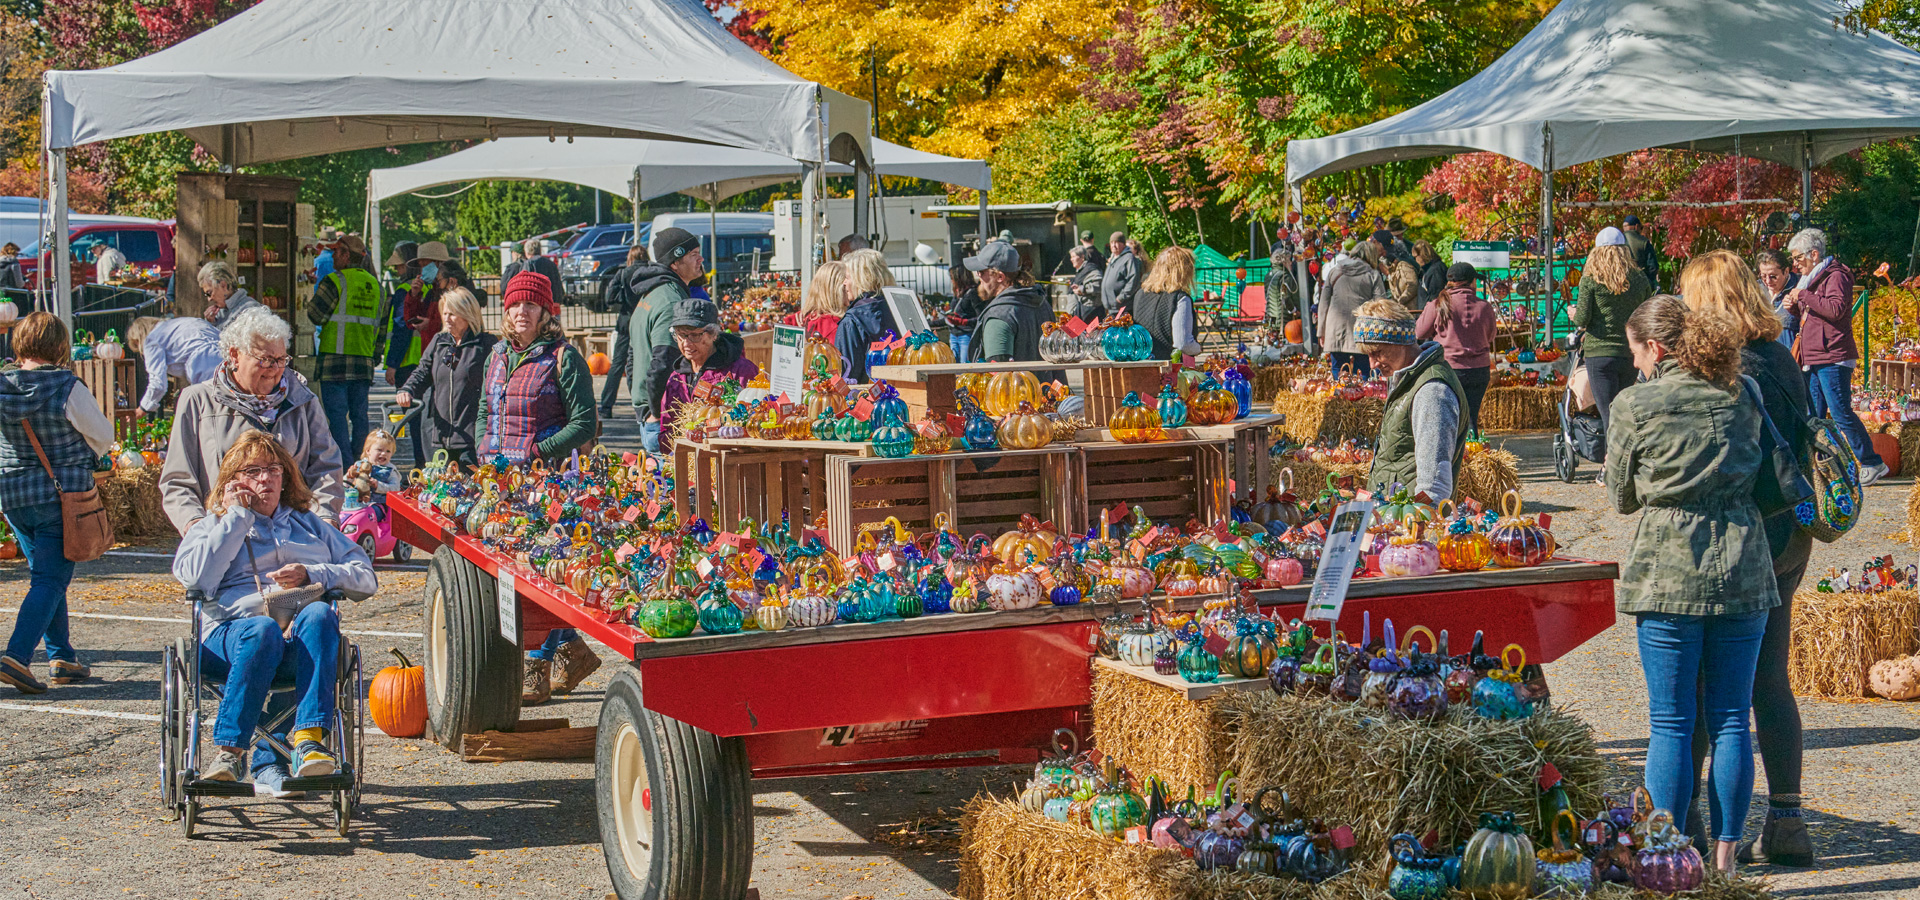 Guests admire all of the brightly colored glass pumpkins during fall